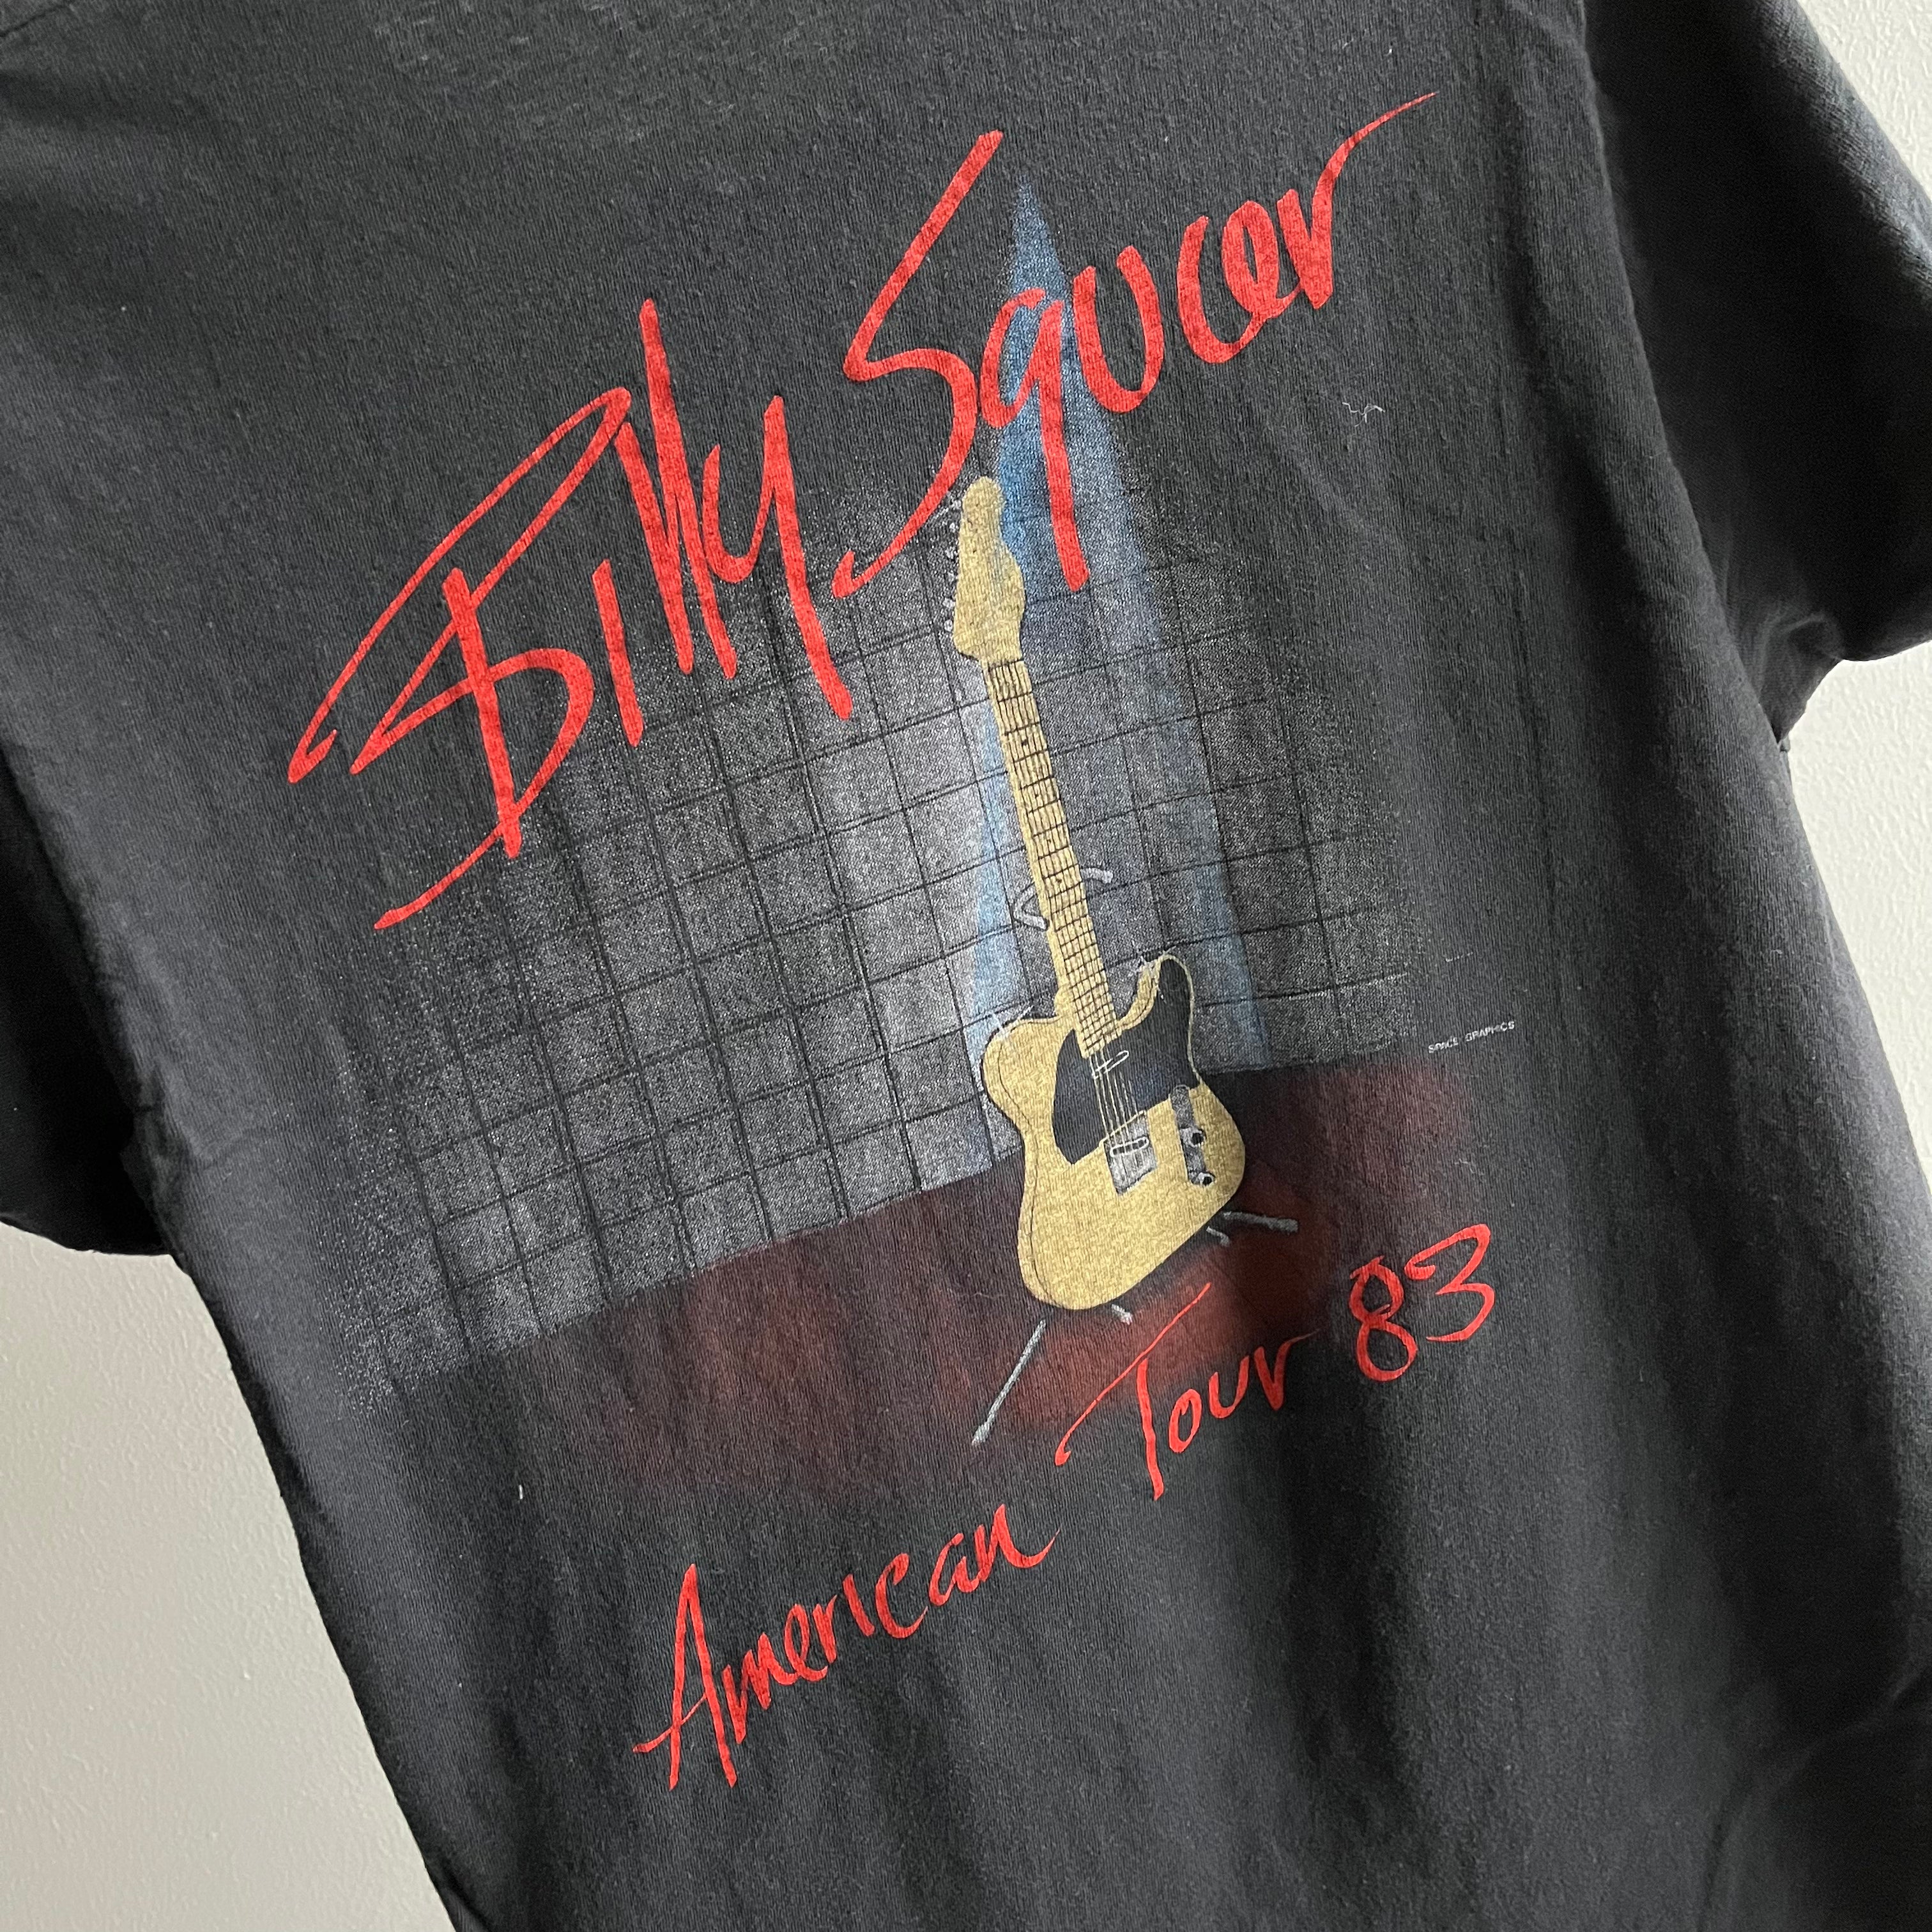 1983 Billy Squier American Tour Front and Back T-Shirt